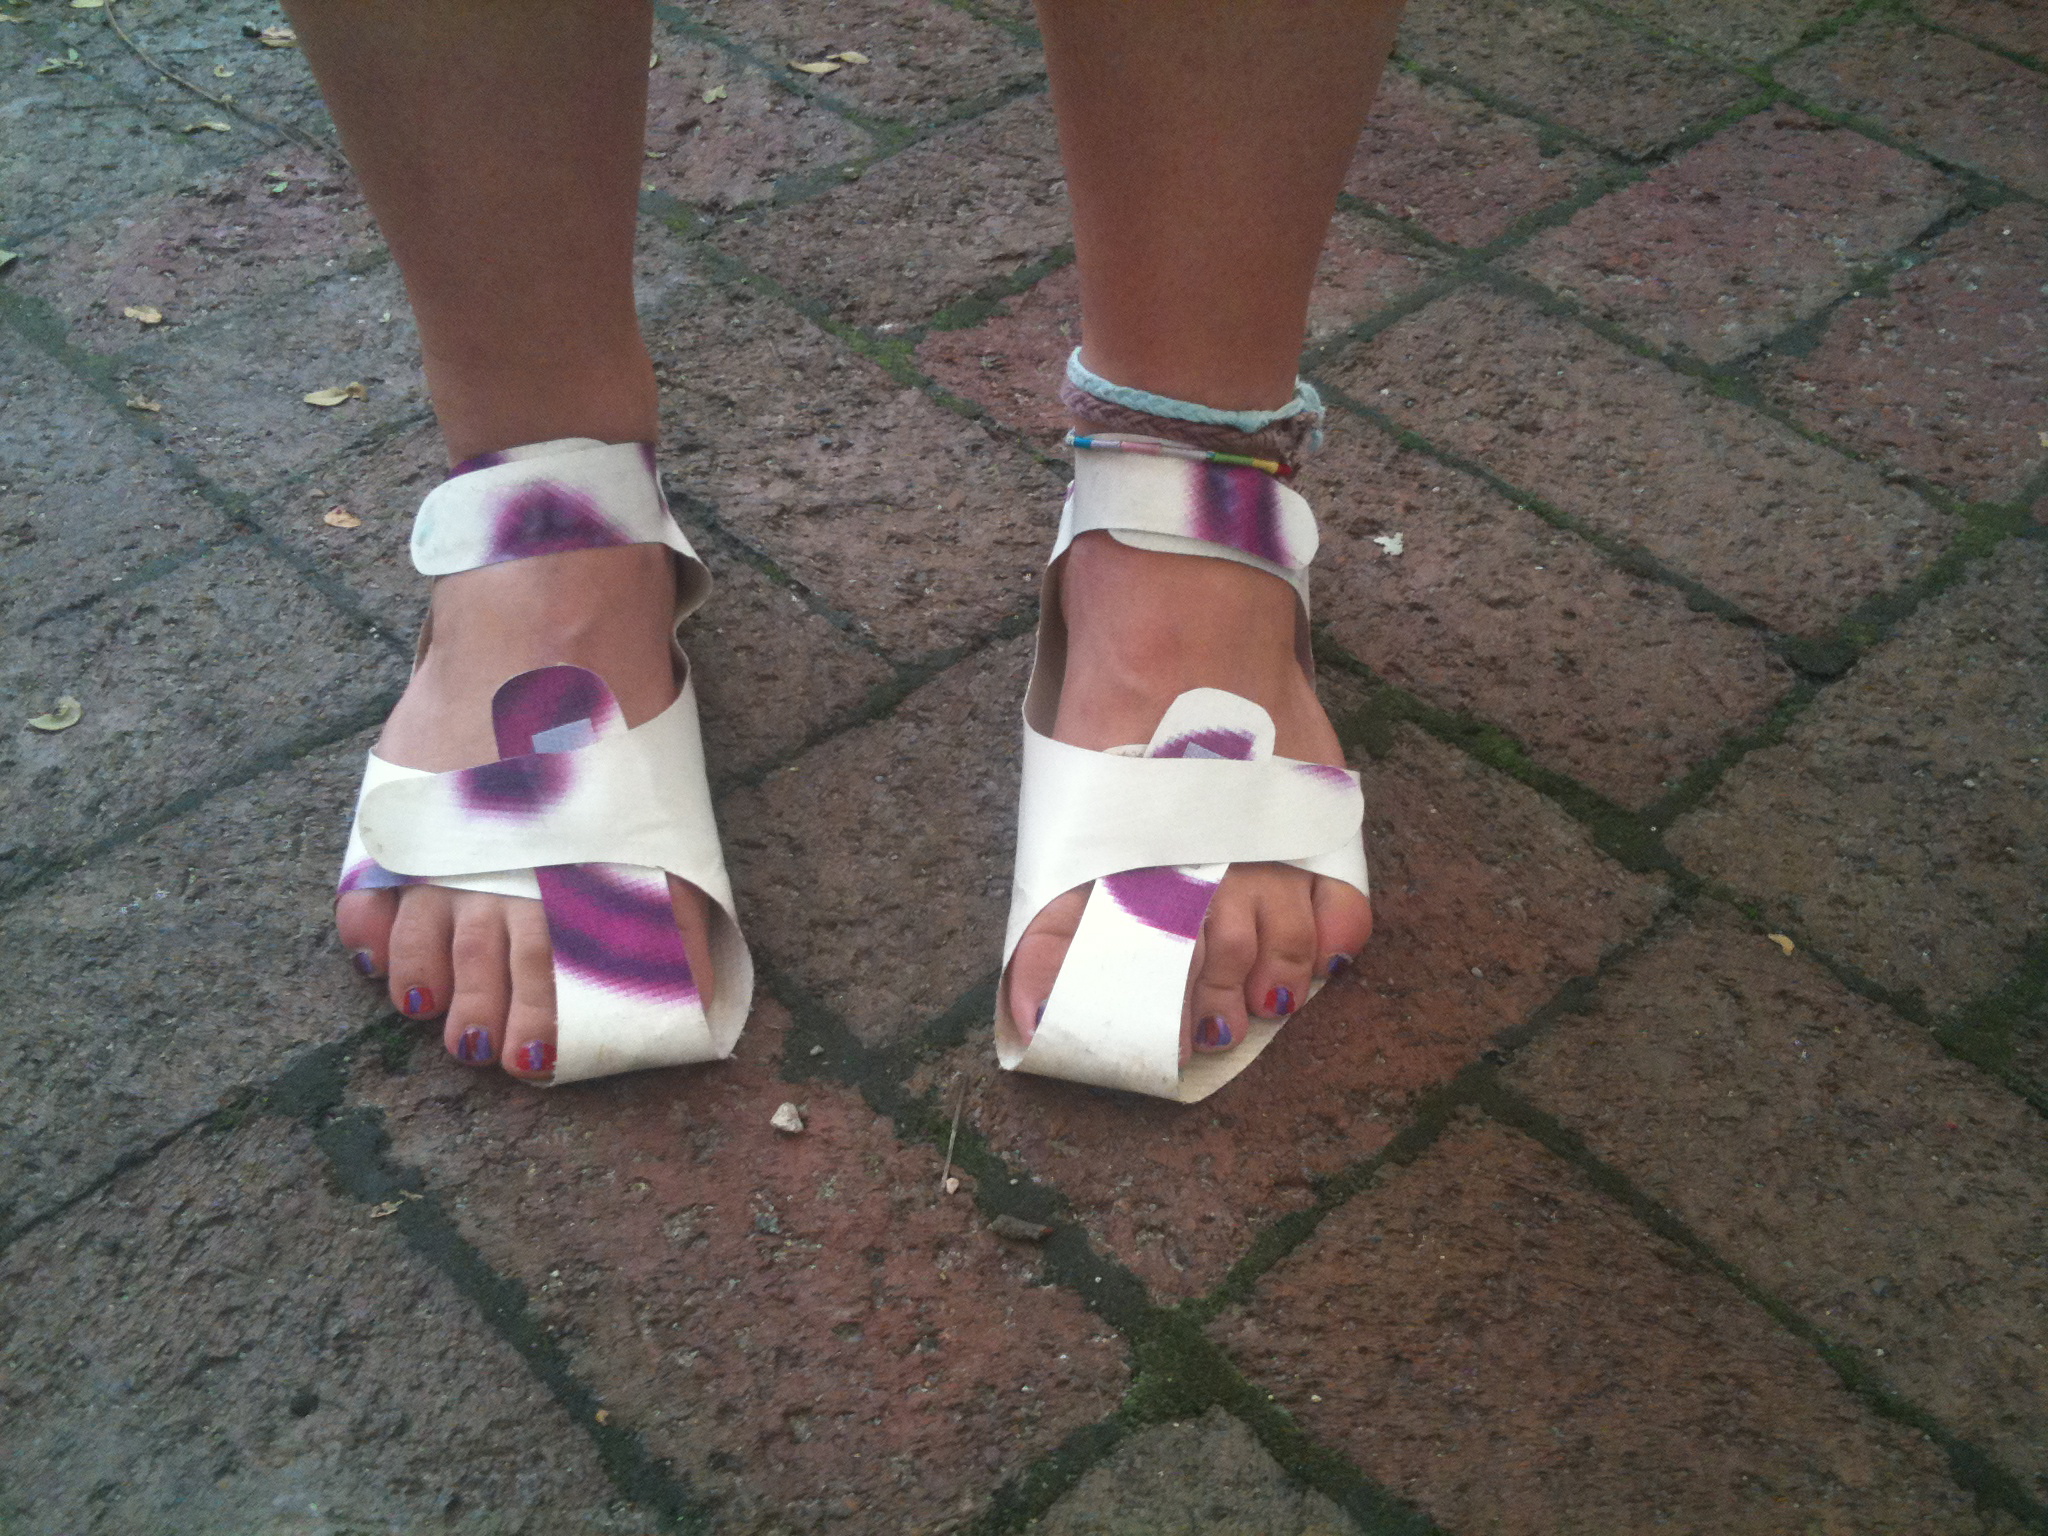 a person's foot with white sandals and purple patterns